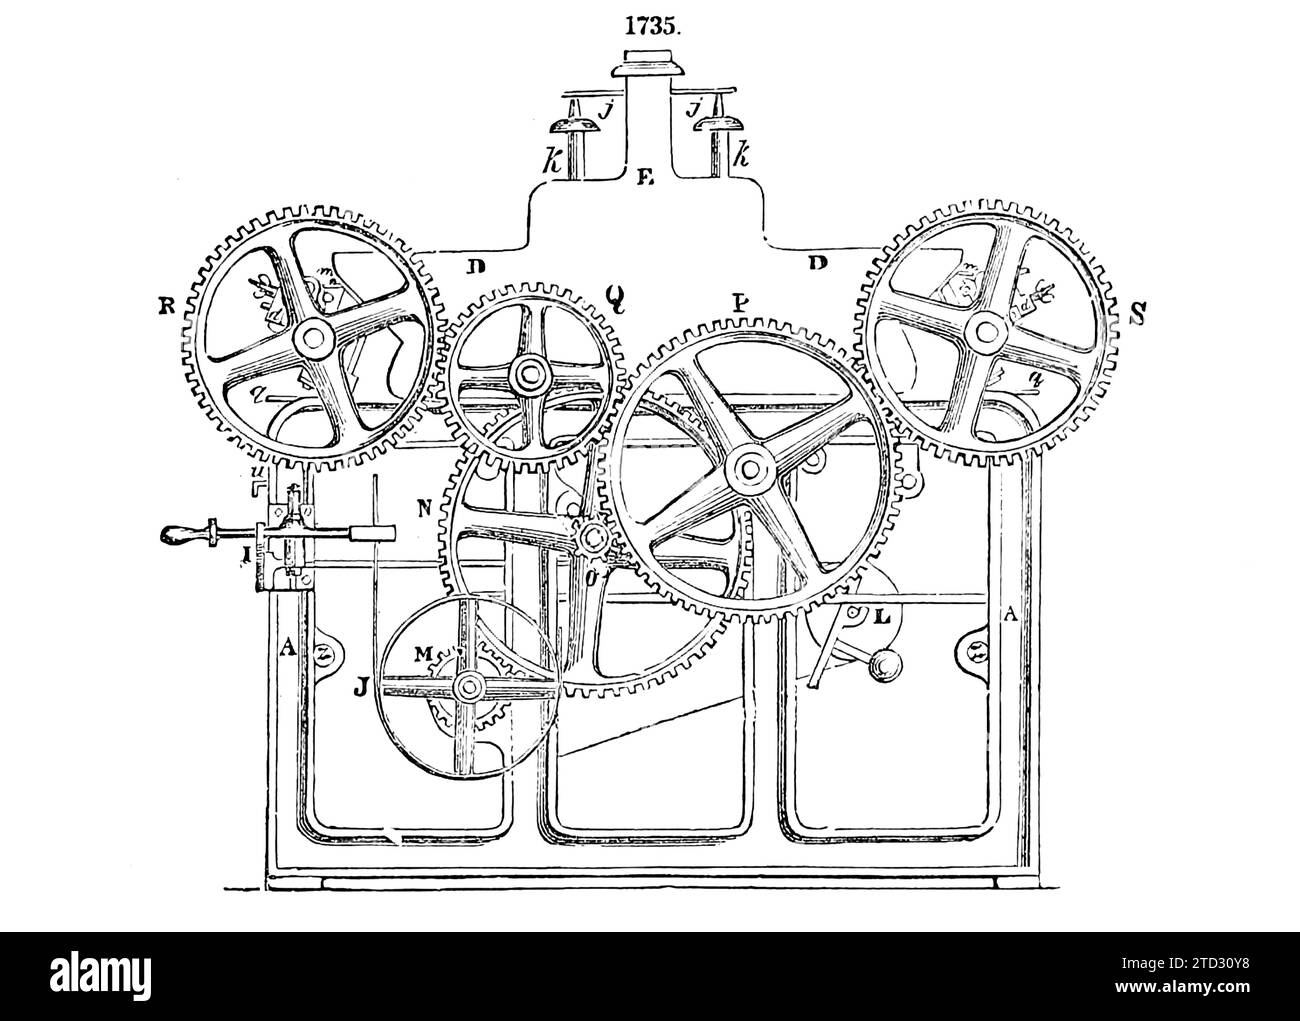 Machinery for preparing and spinning flax, illustration. From 'Appleton's dictionary of machines, mechanics, engine-work, and engineering' by D Appleton and Company. Publication date 1874. Stock Photo